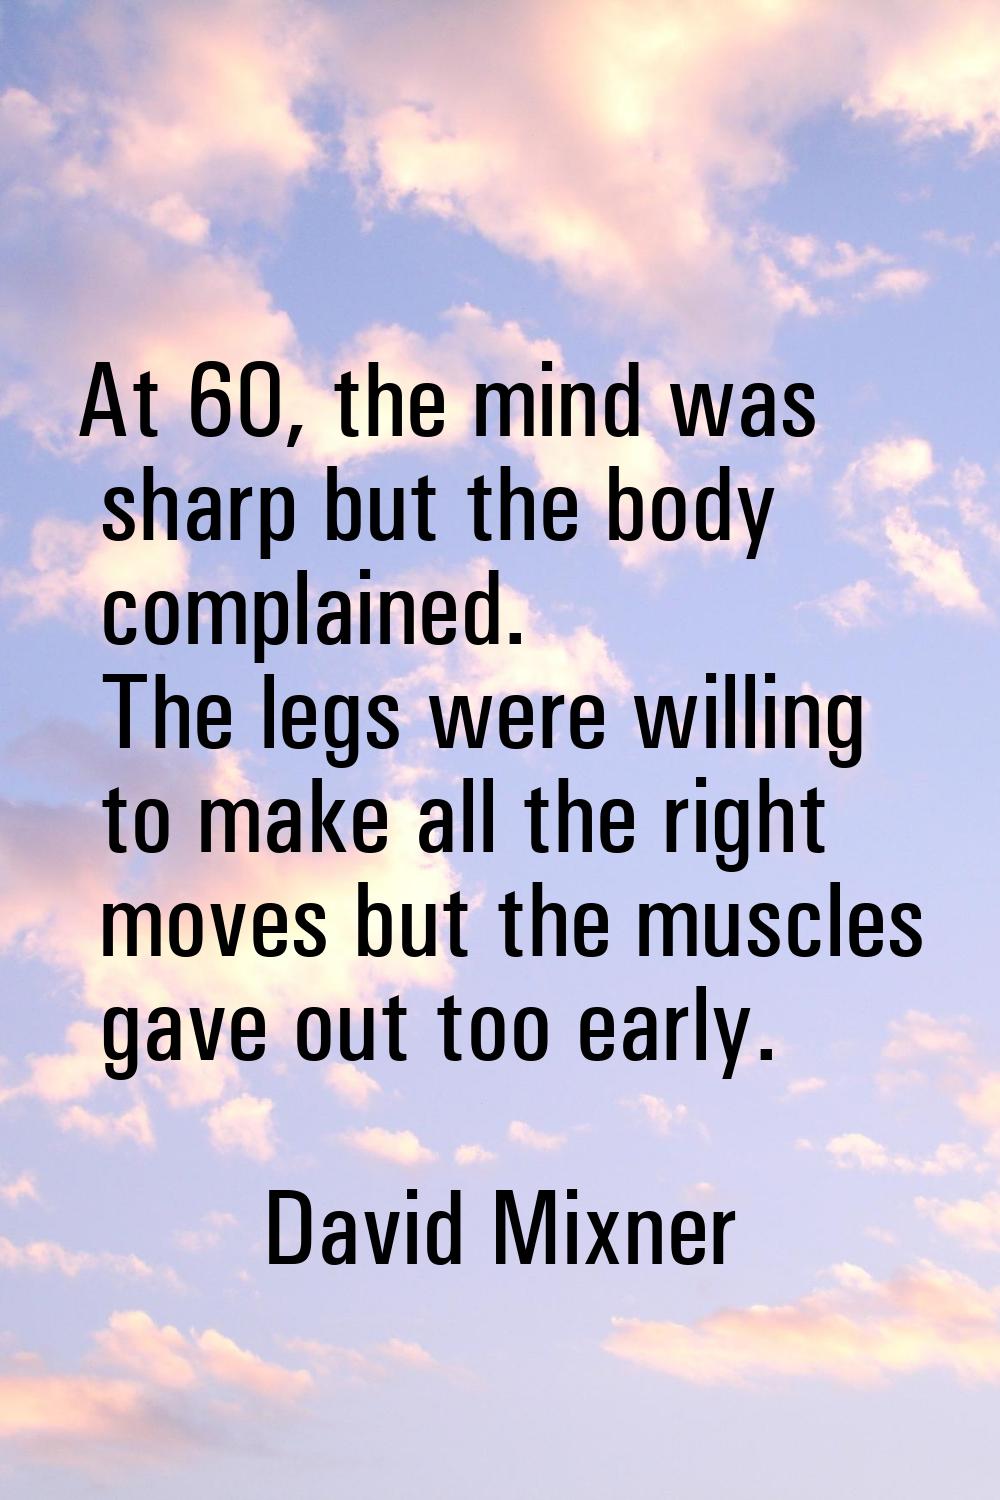 At 60, the mind was sharp but the body complained. The legs were willing to make all the right move